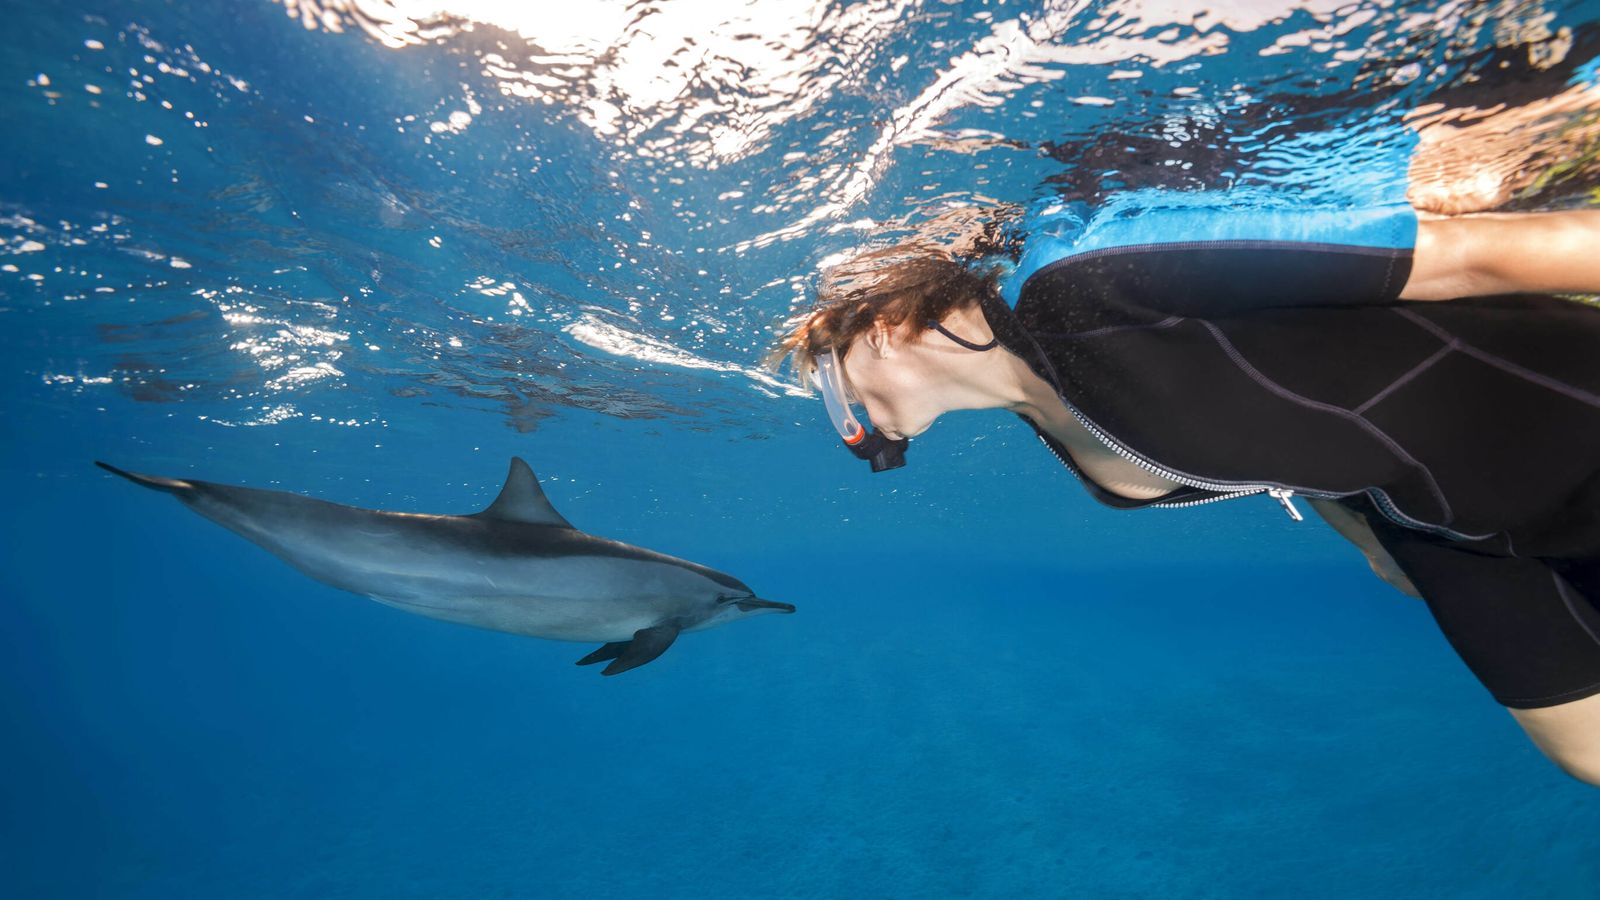 Dolphins have similar personality traits to humans, new study shows